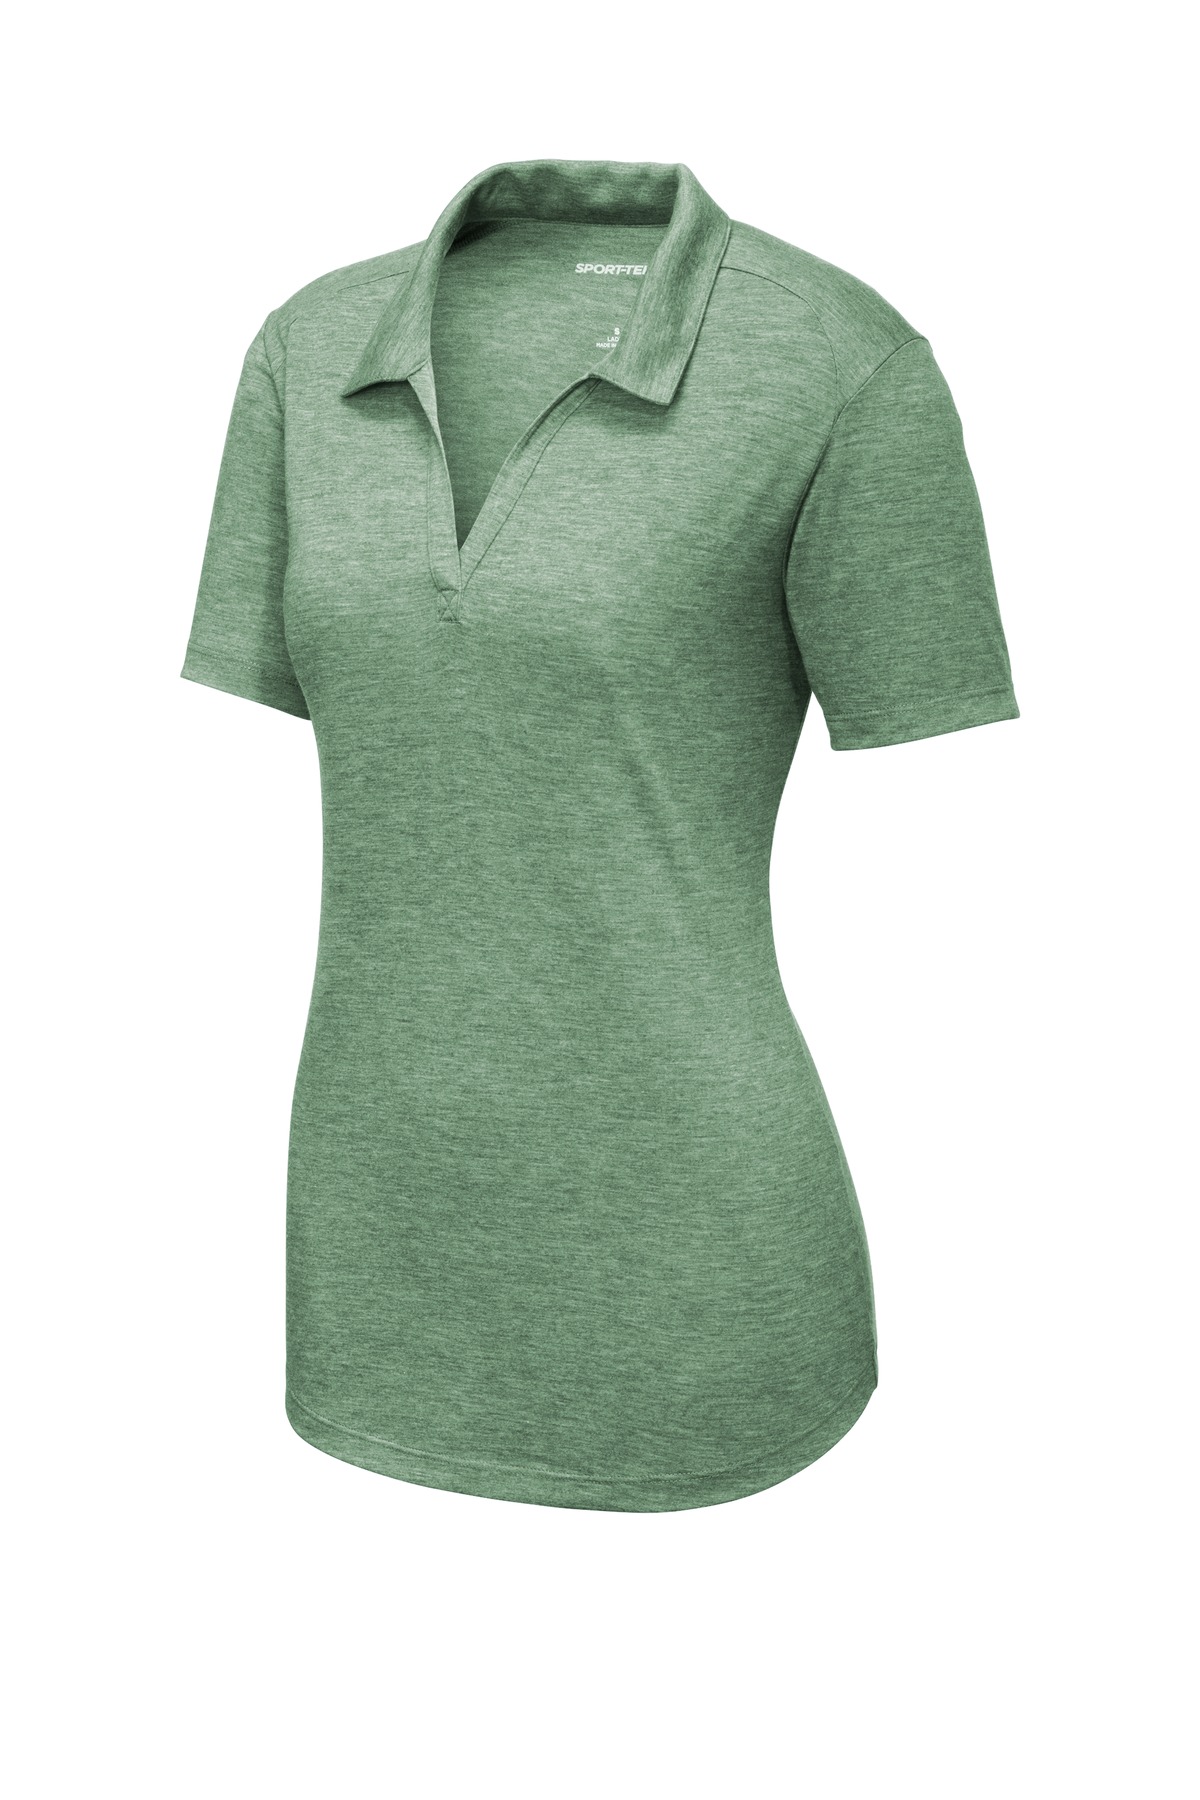 Ladies PosiCharge  Tri-Blend Wicking Polo - LST405